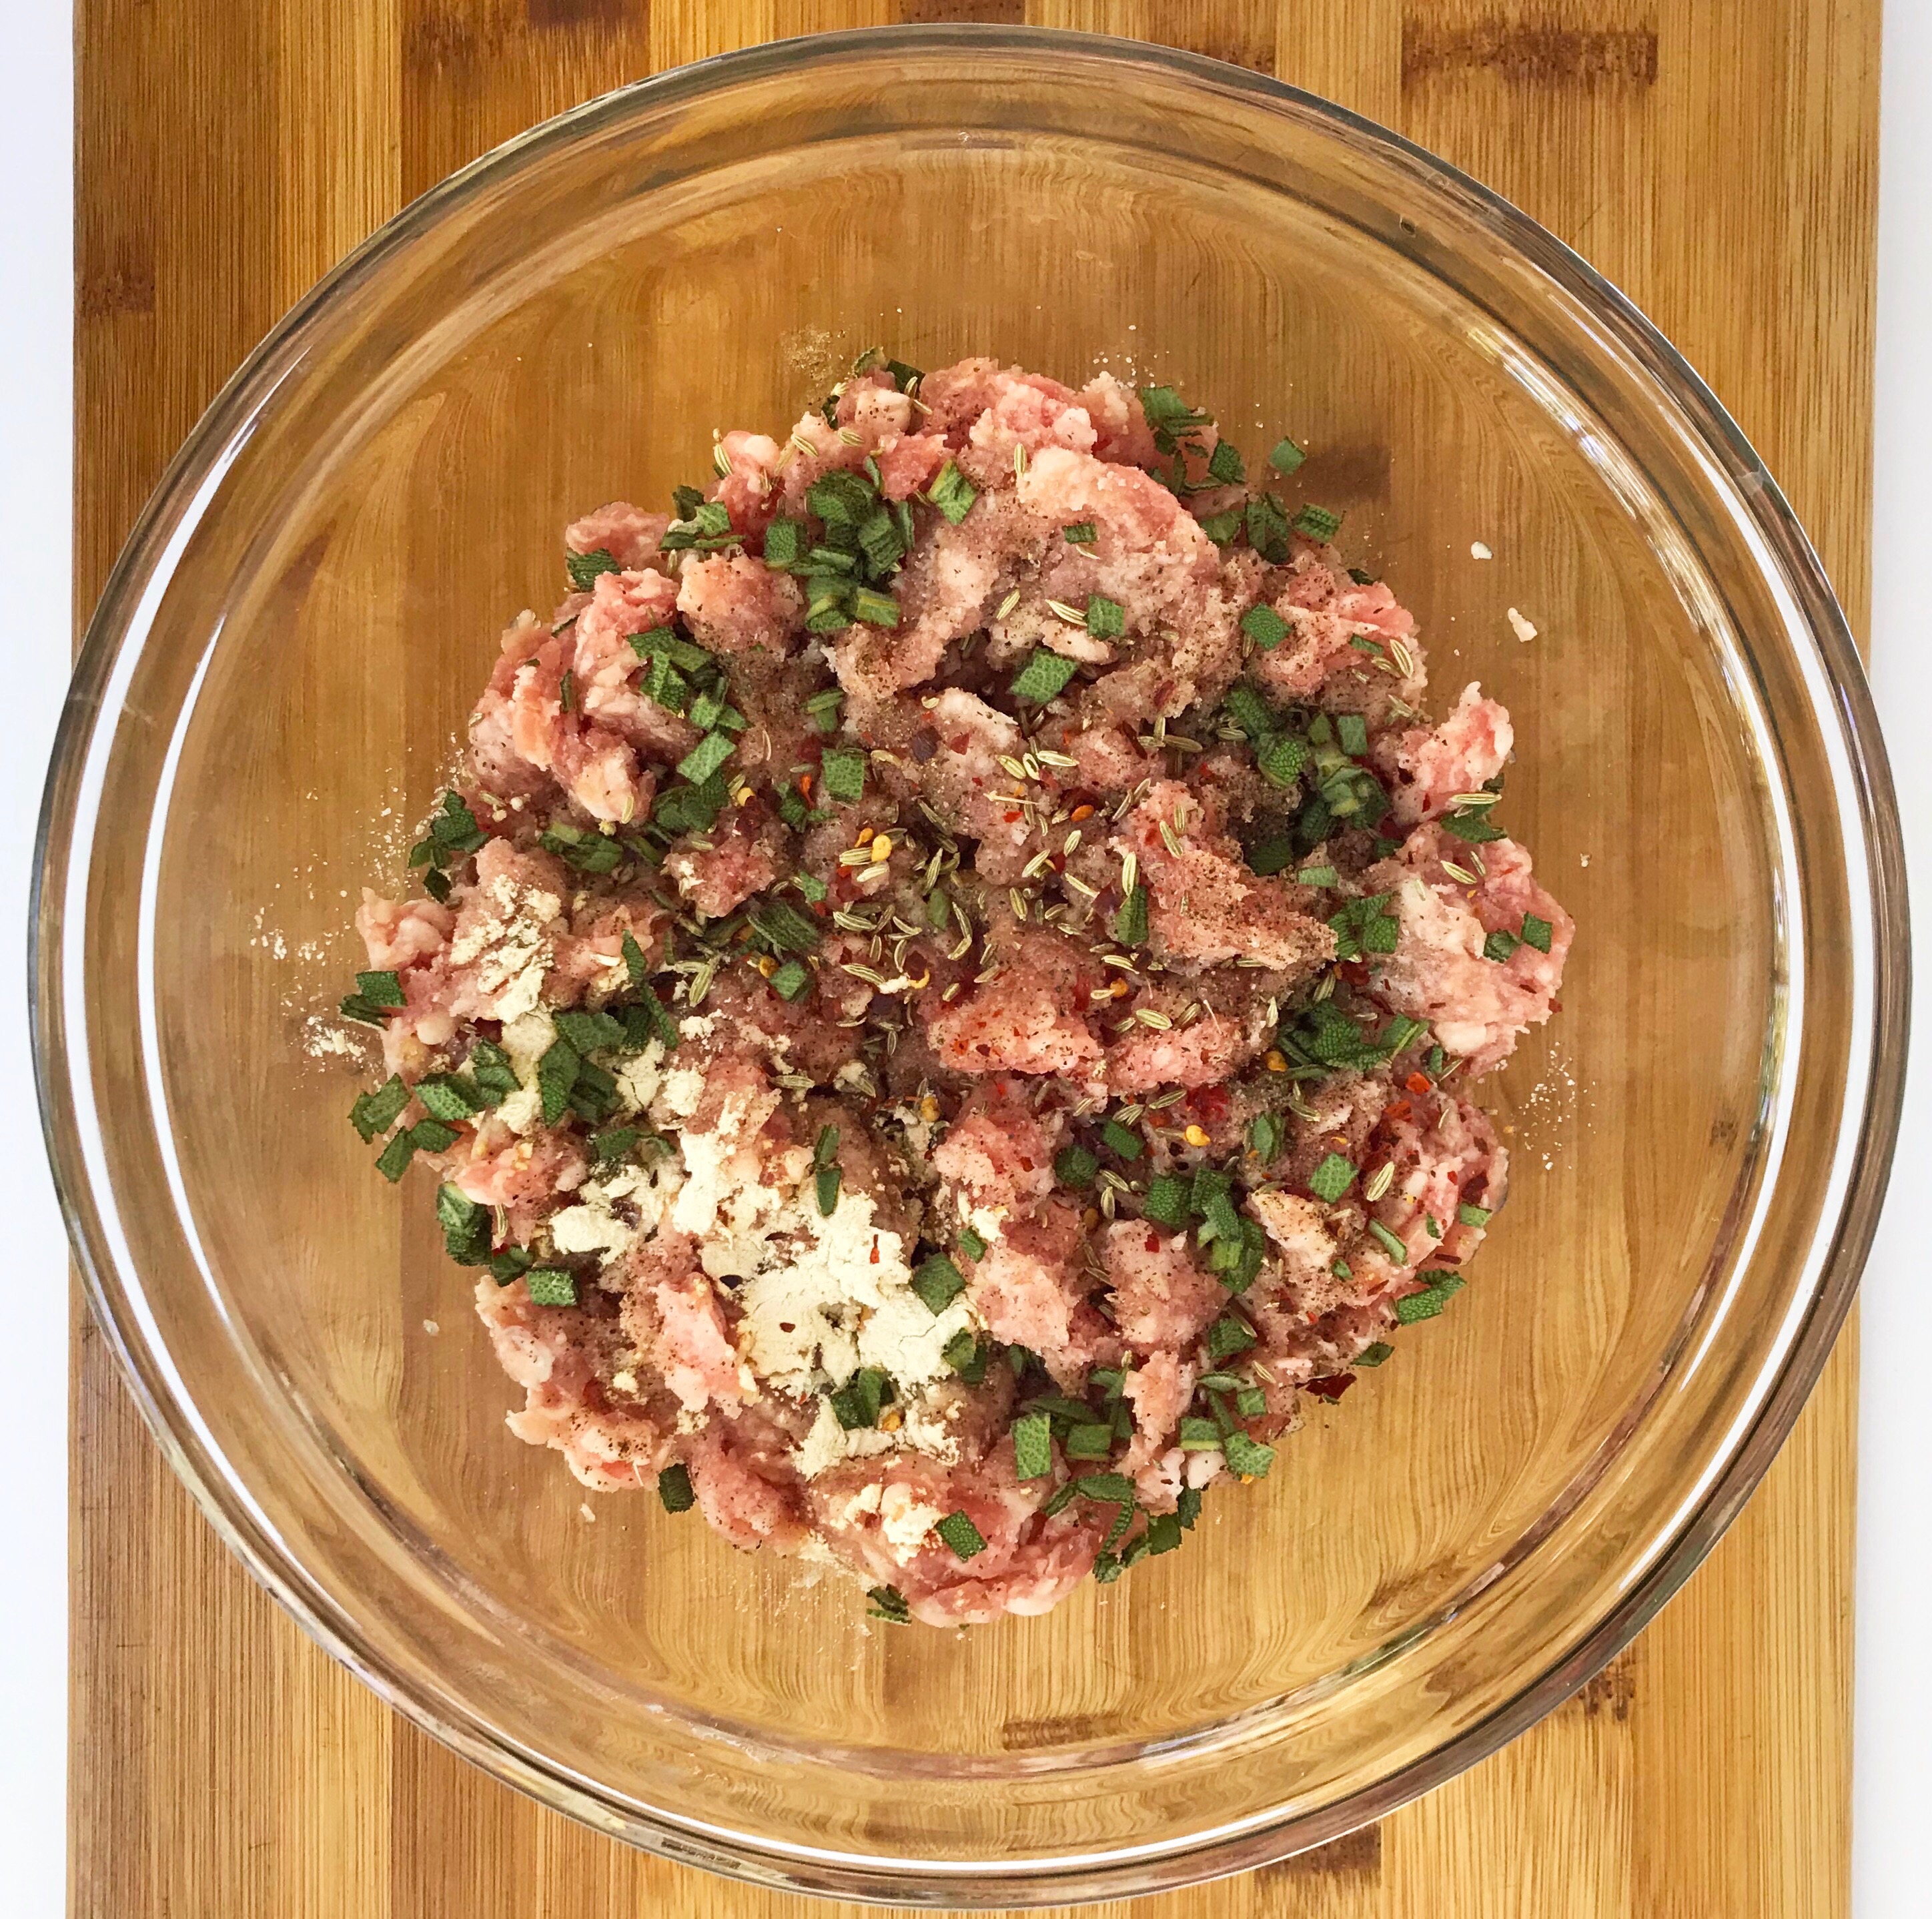 Preparation shot of a mixing bowl with ground pork, seasonings, maple syrup, and fresh sage on a wooden cutting board.